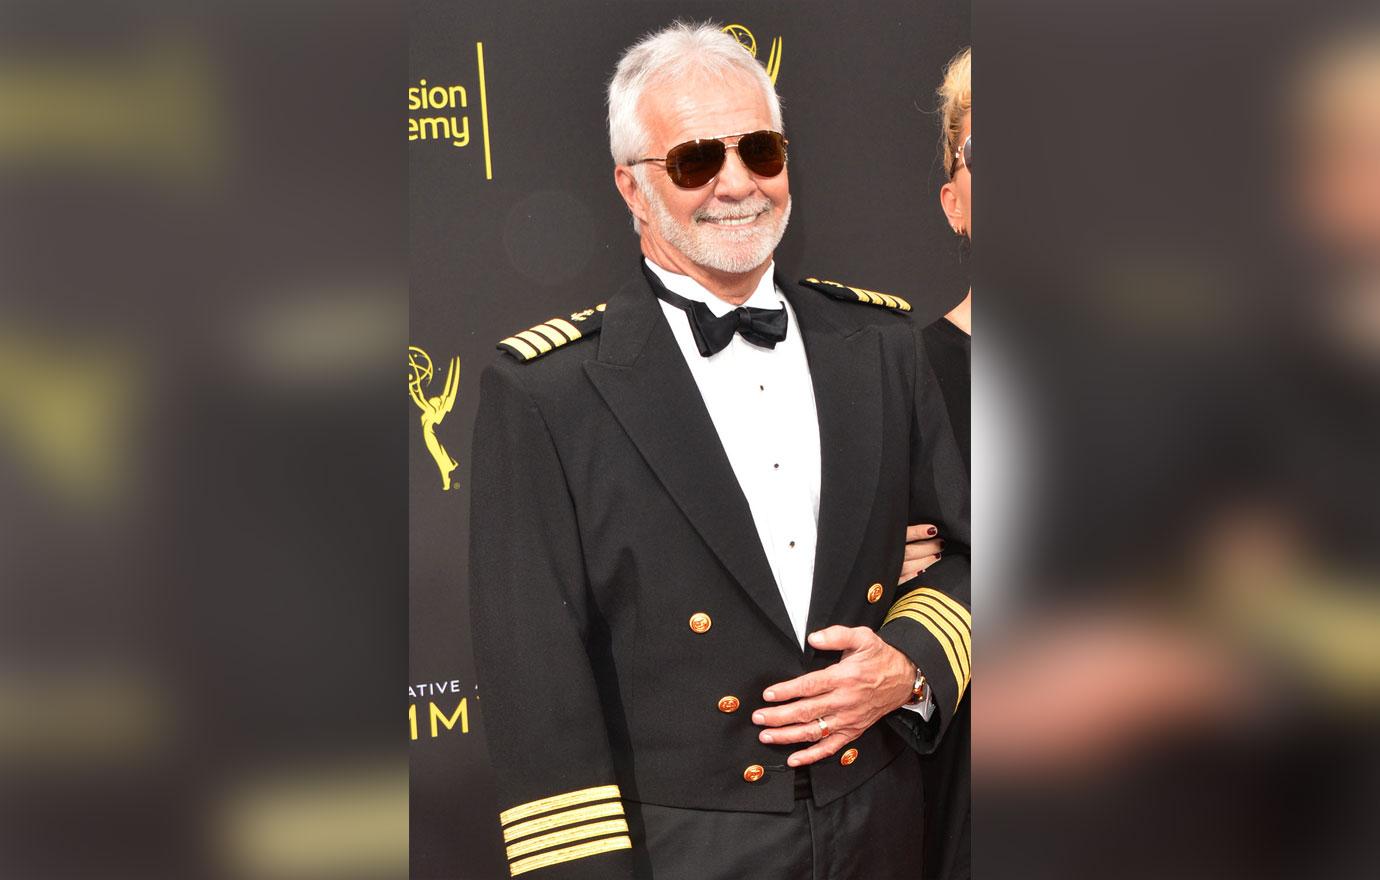 Captain Lee Axed From 'Below Deck' In Order To 'Freshen Up' Series